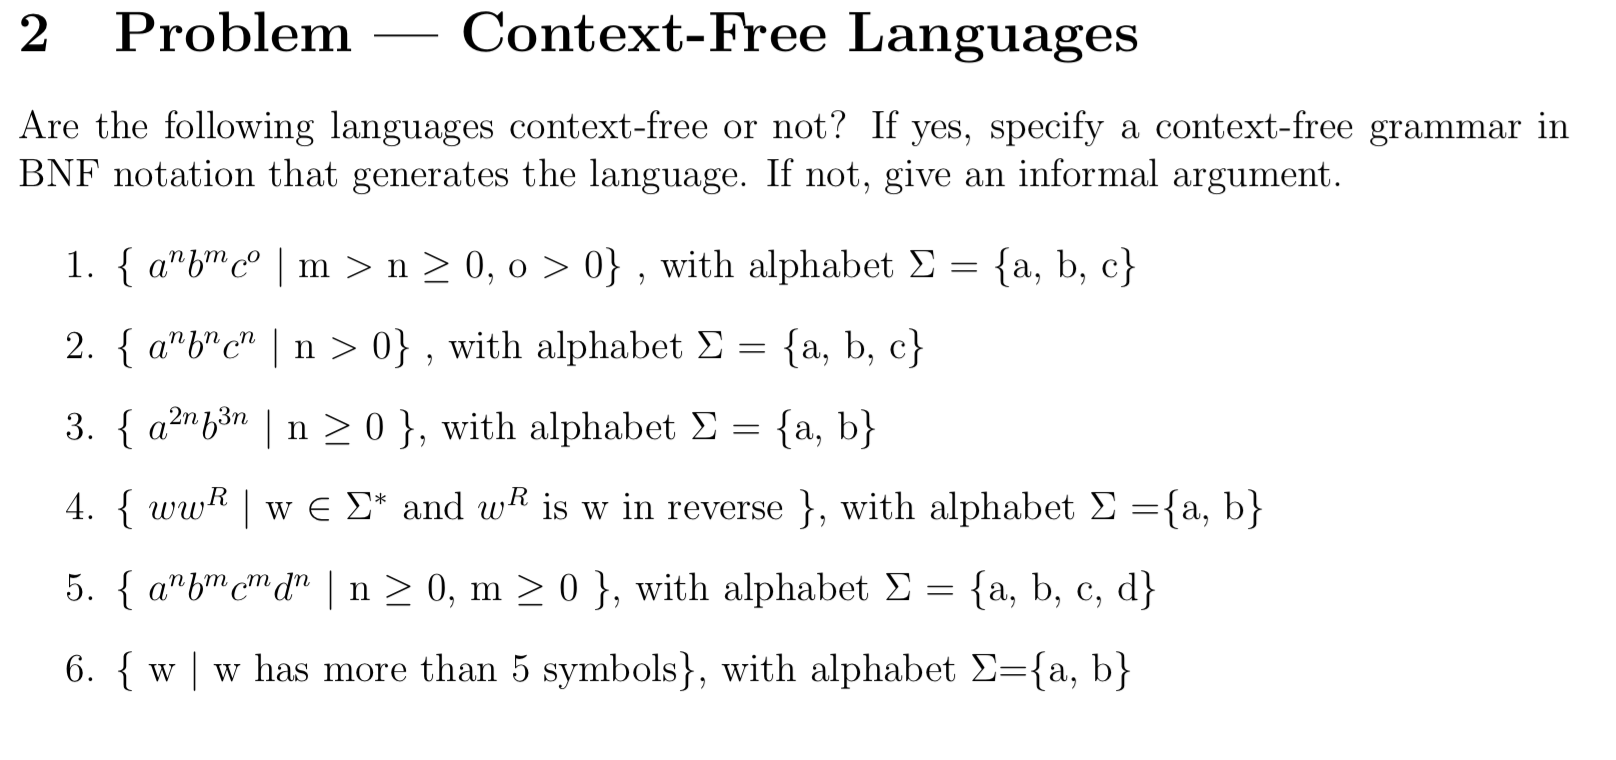 find context-free grammars for each of the following languages